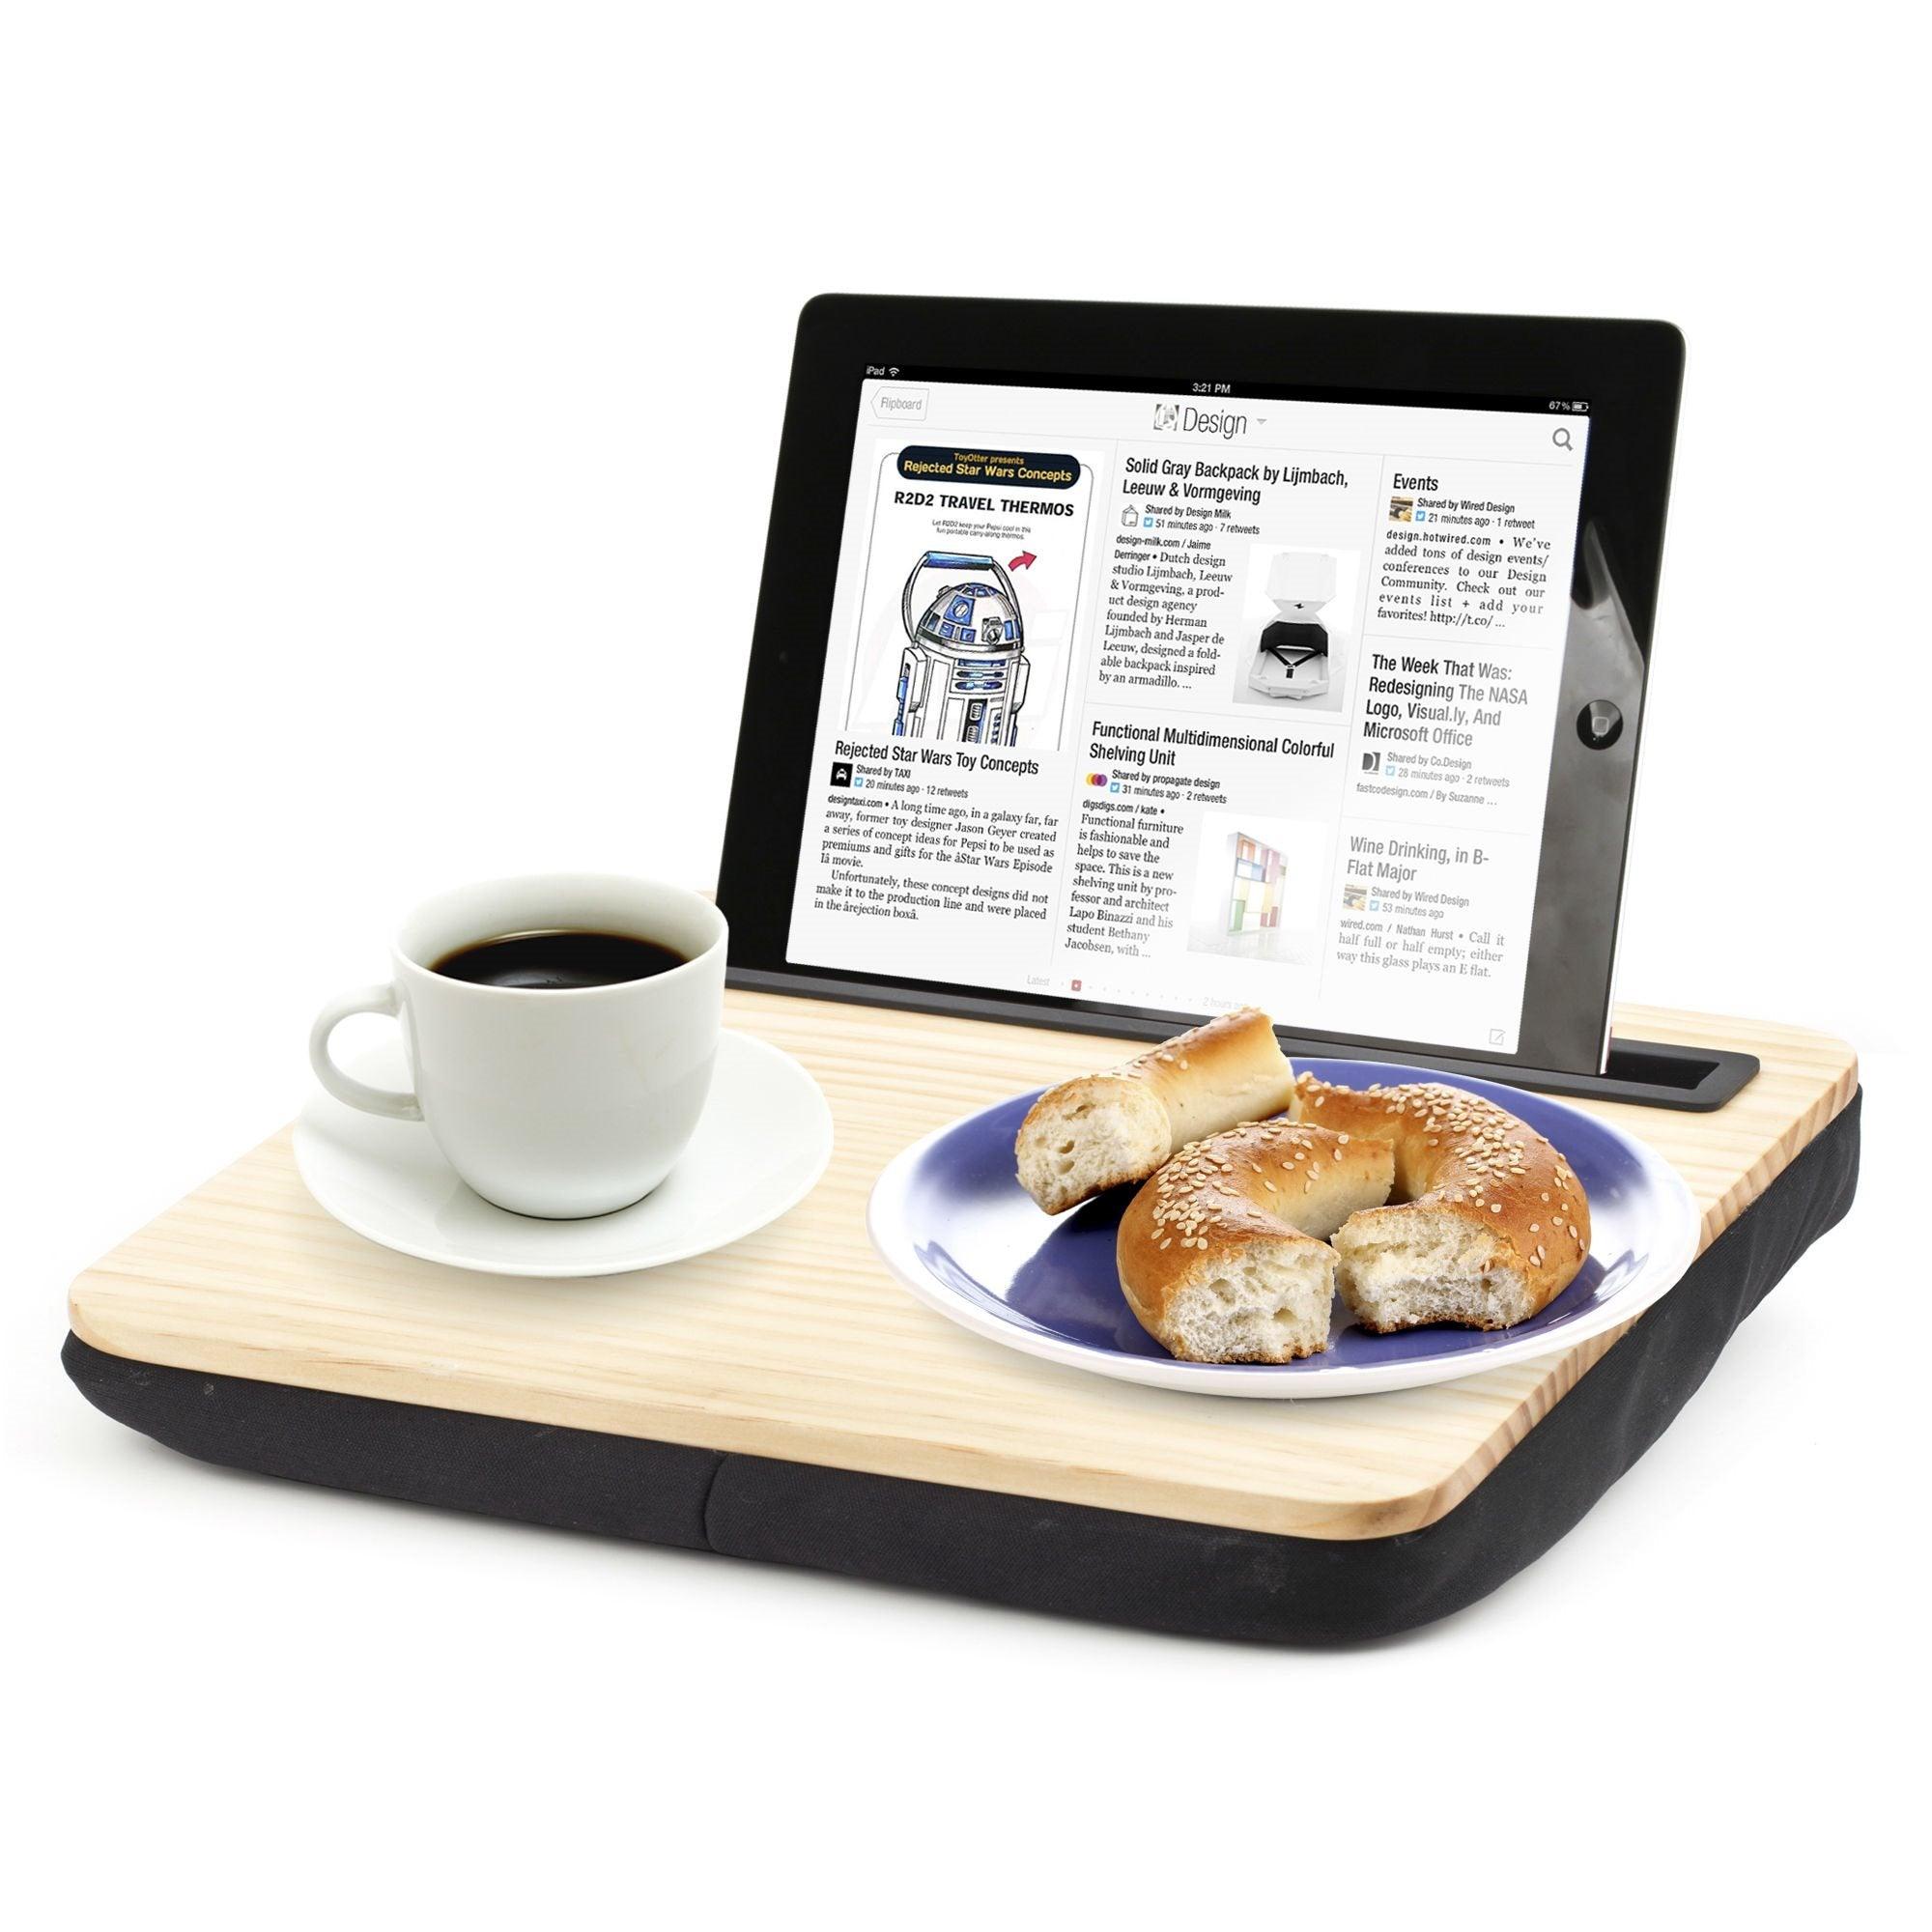 Kikkerland iBed Lap Wooden Desk - Hands-free Lap Tablet or NoteBook Holder, Non-slip Surface w/ Micro-Bead Cushion, Comfortable to Use amd Easy to Clean